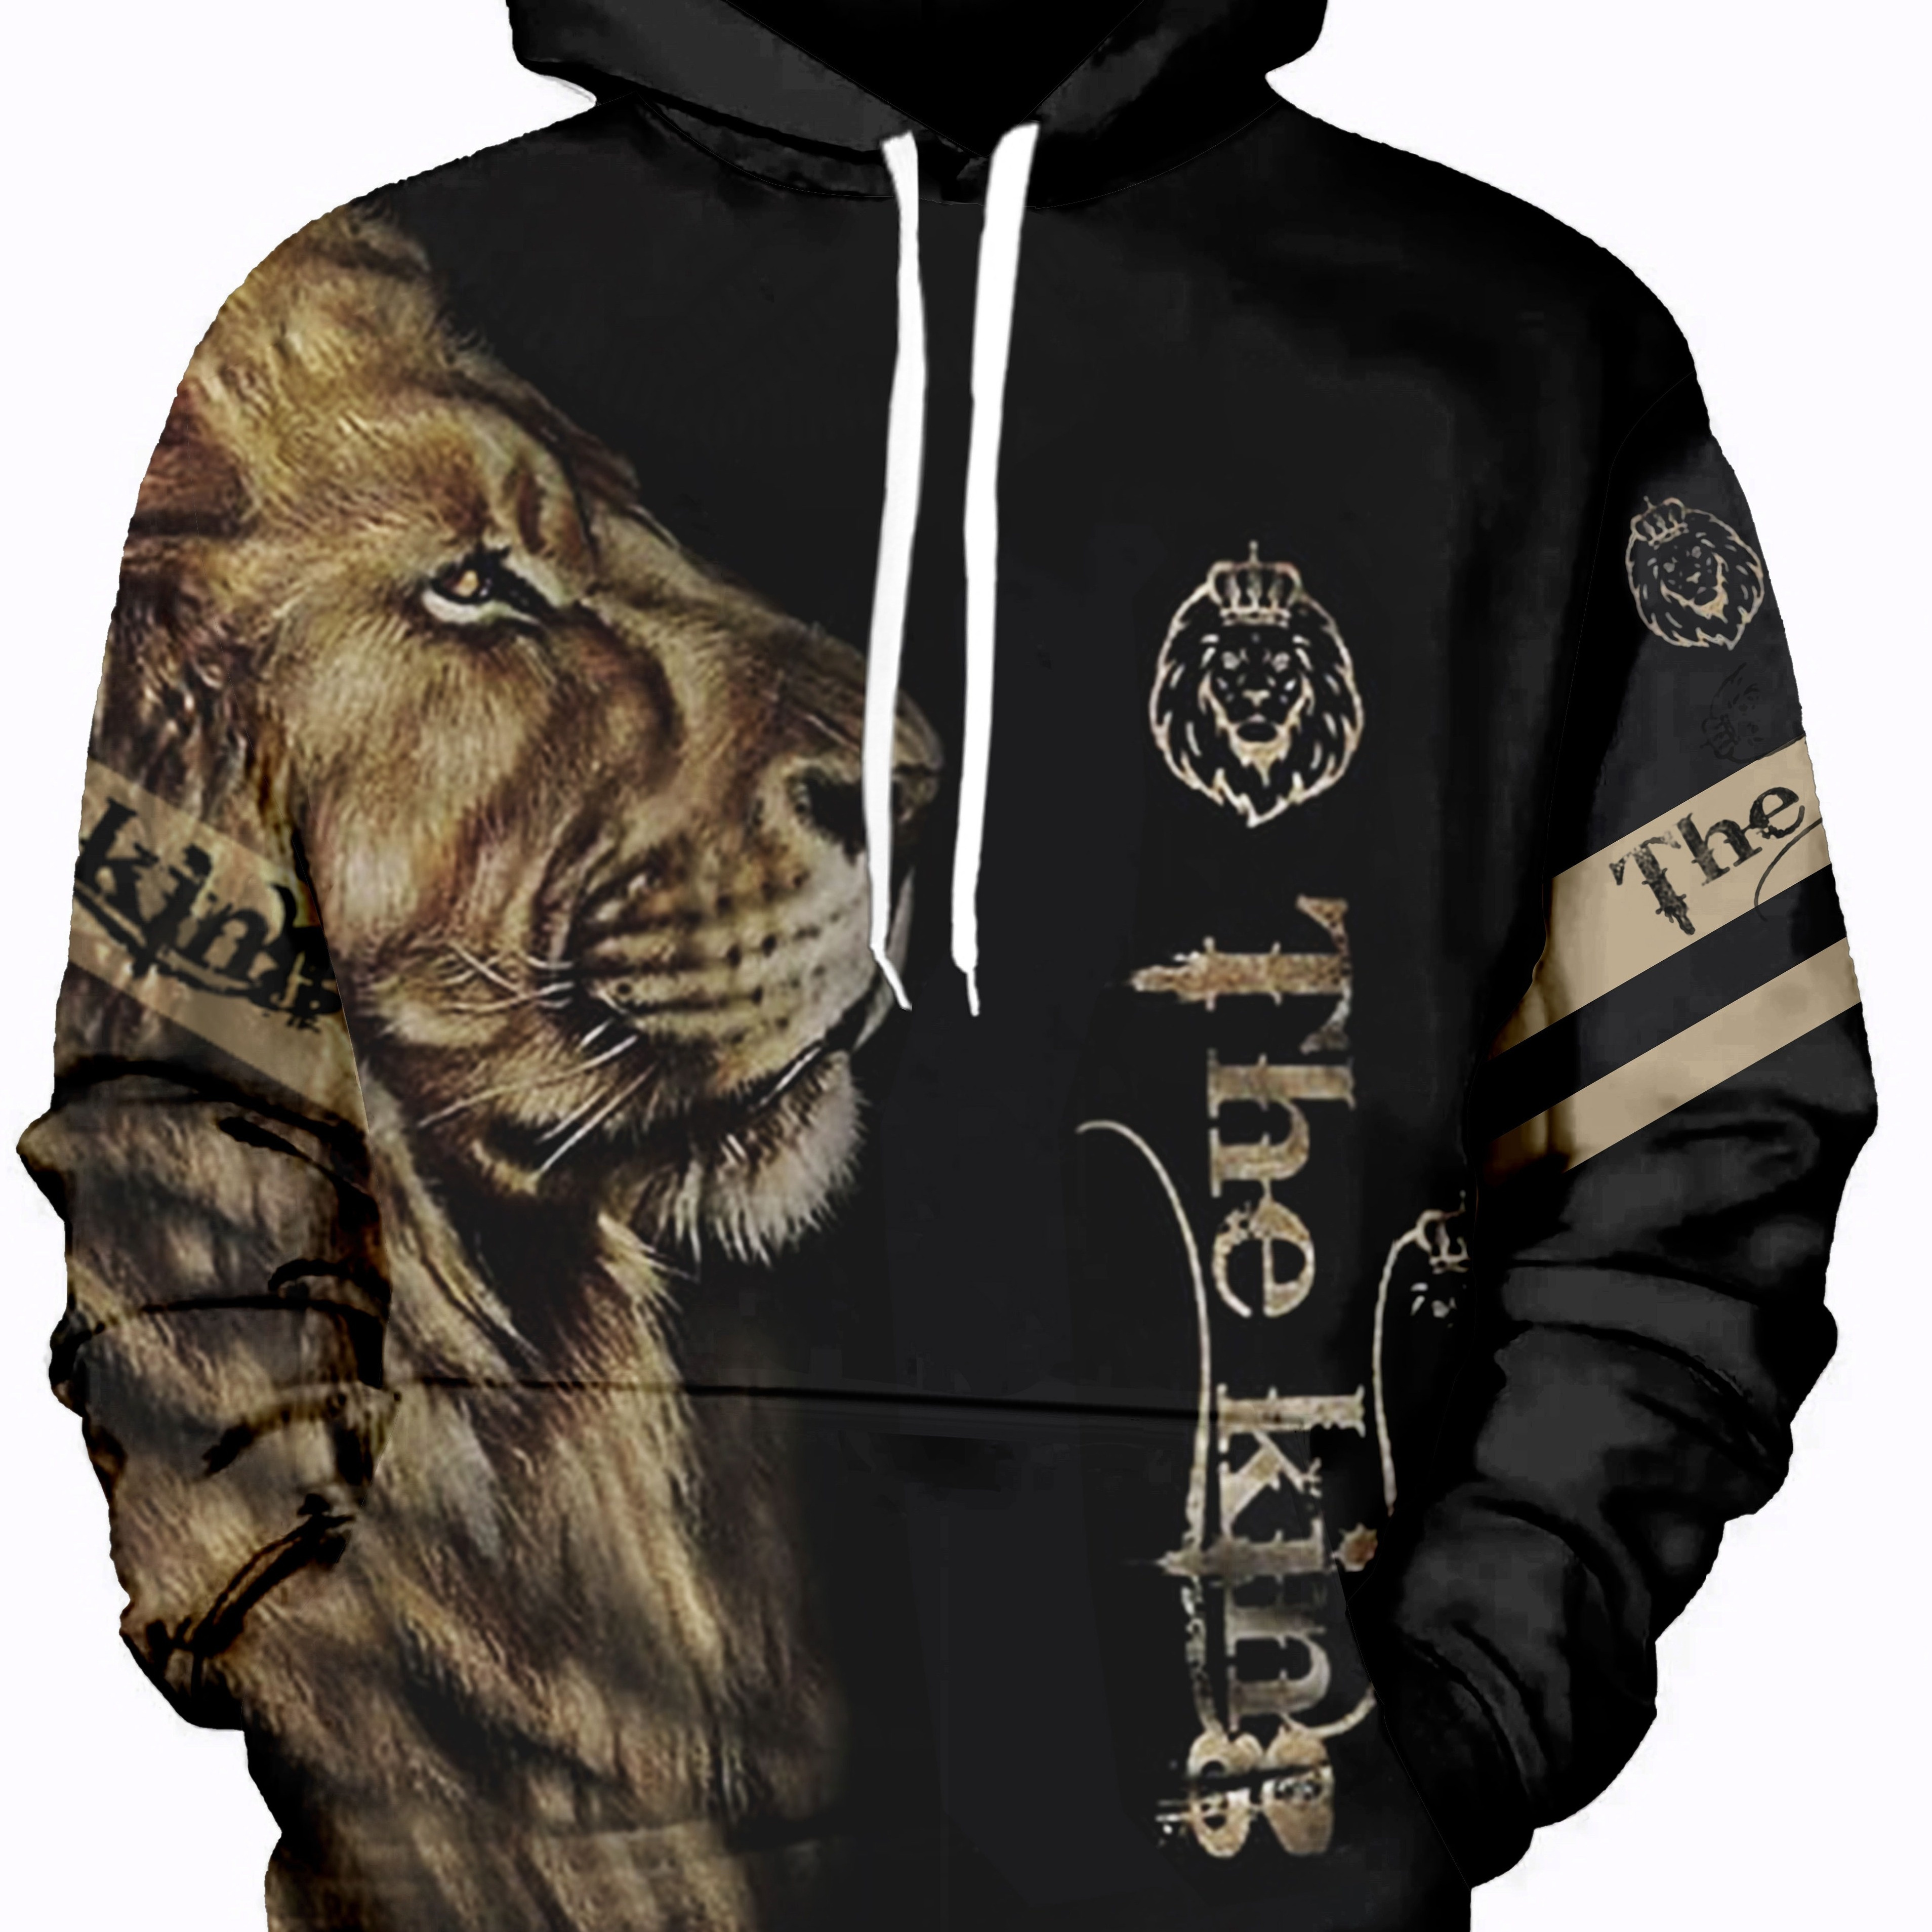 

Hoodies For Men, Lion Print Hoodie, Men’s Casual Pullover Hooded Sweatshirt With Kangaroo Pocket For Spring Fall, As Gifts